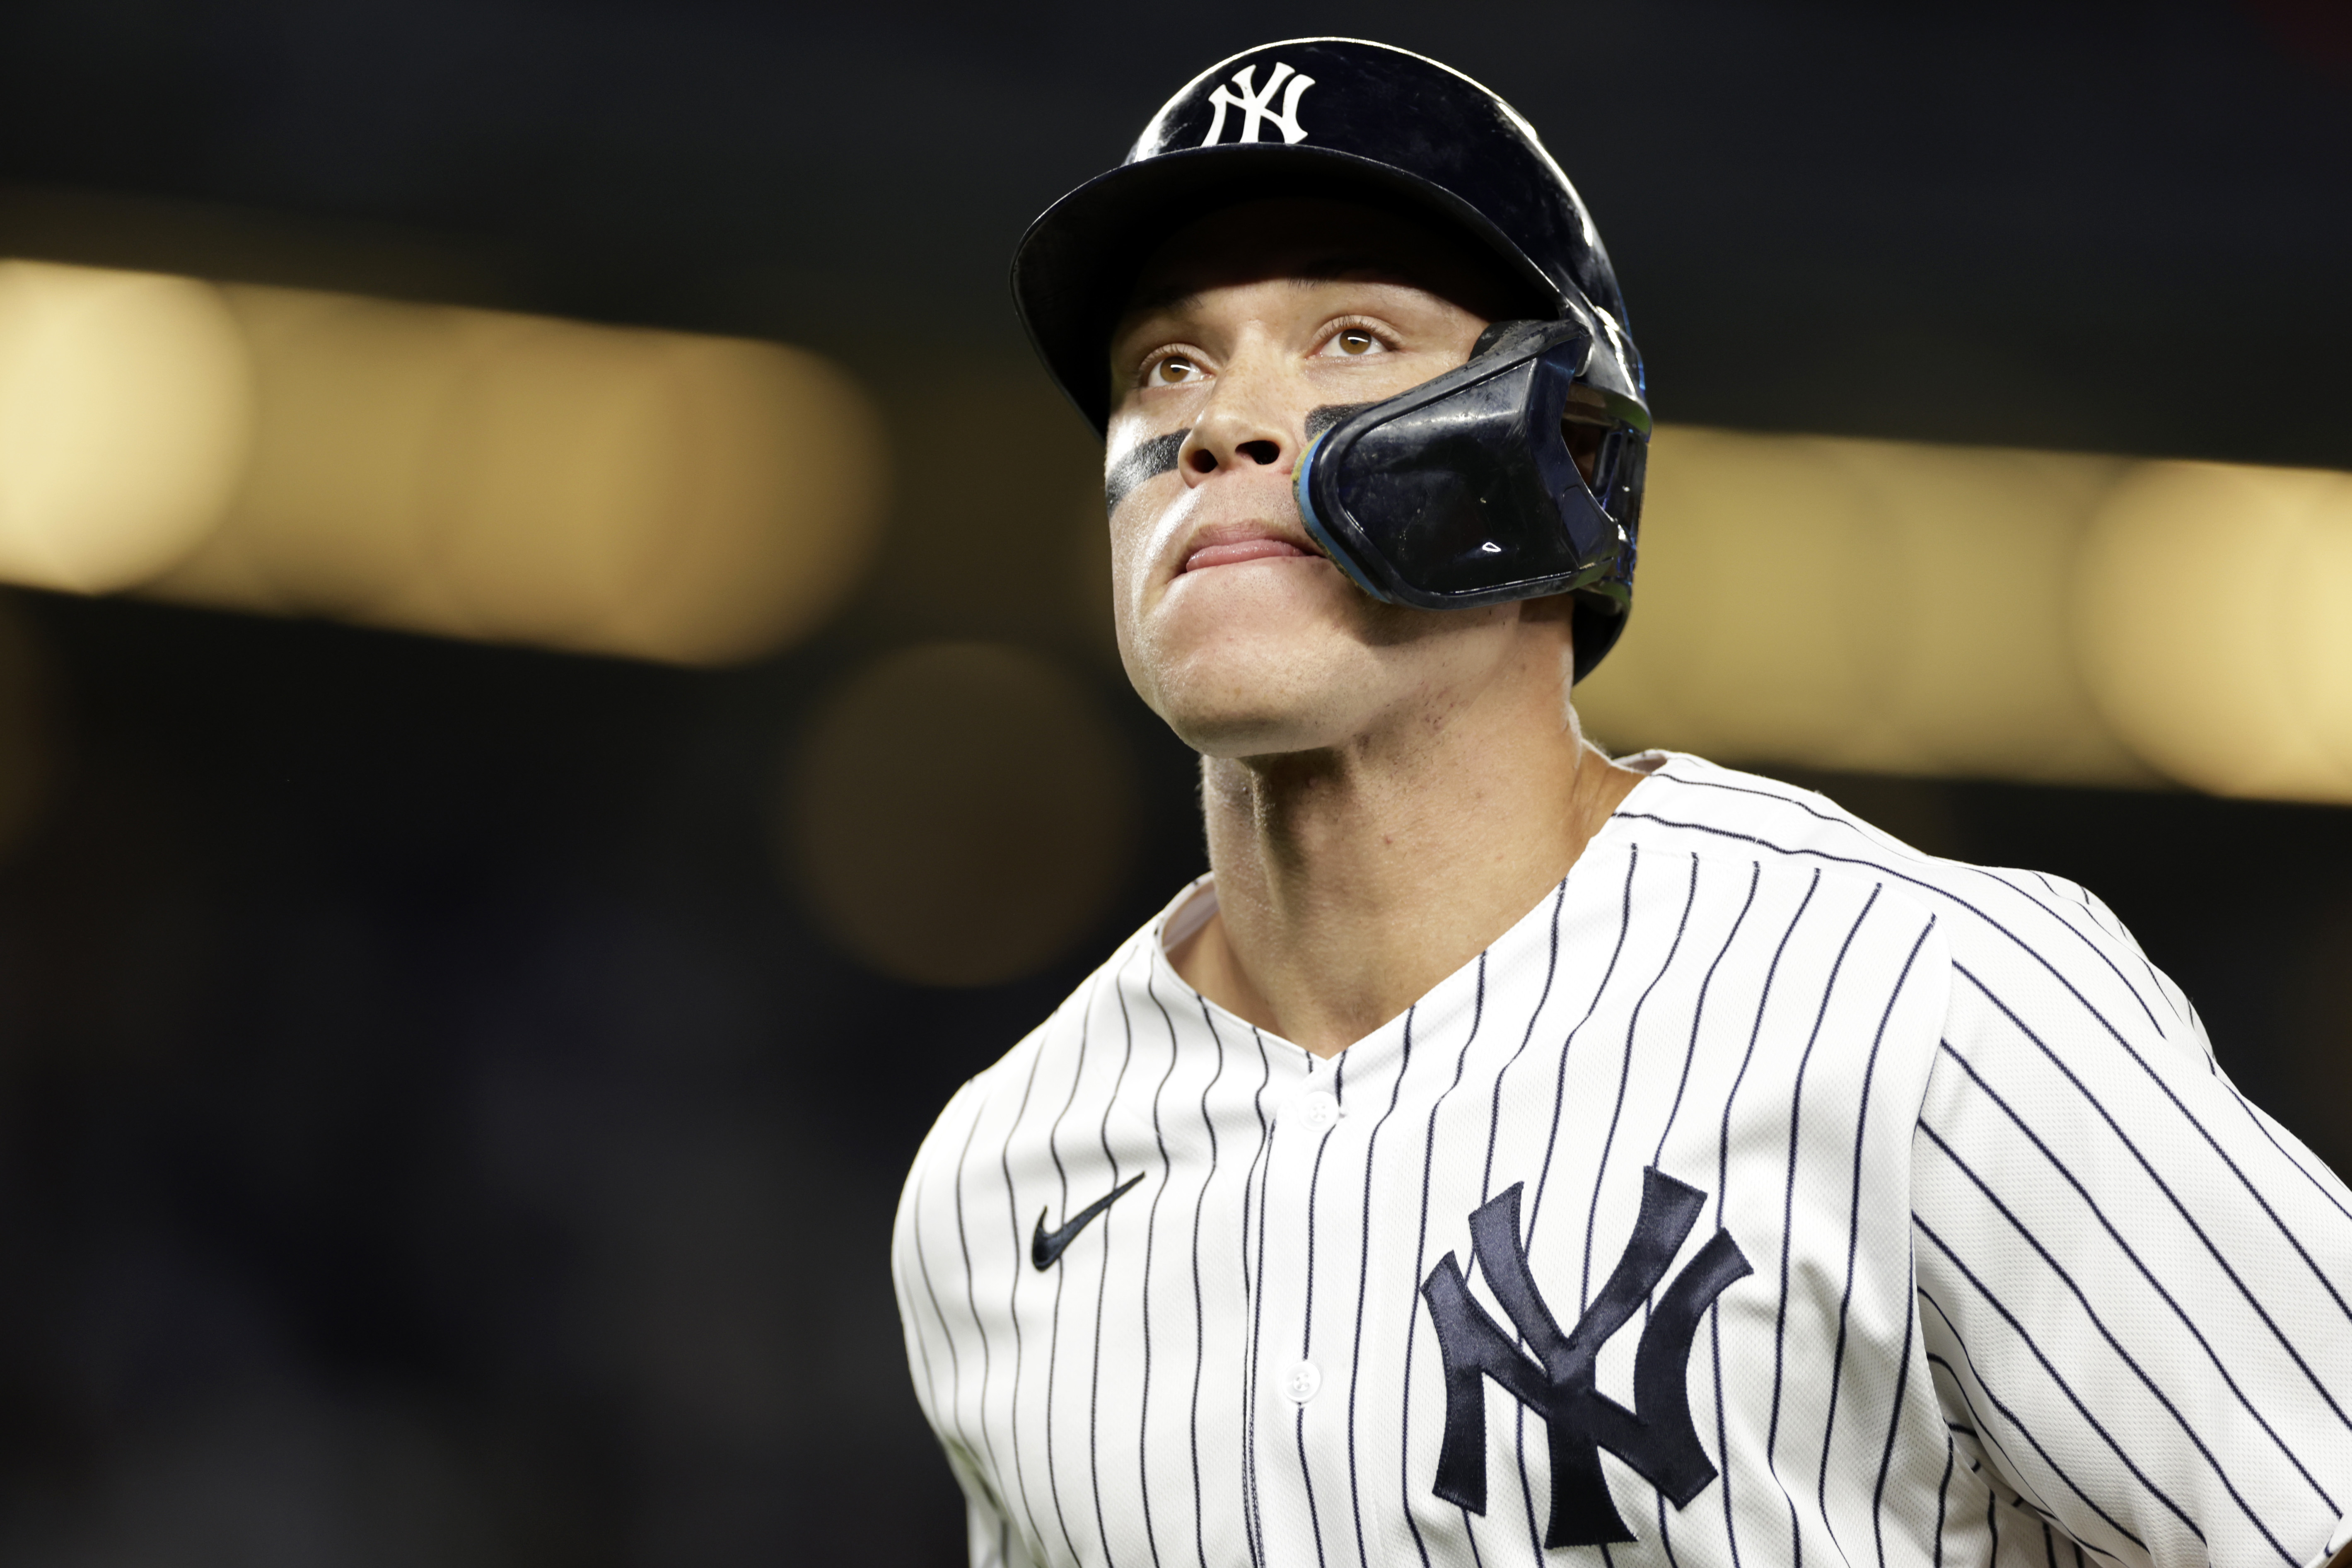 Aaron Judge (3 HRs), Yankees crush Nats to end 9-game skid